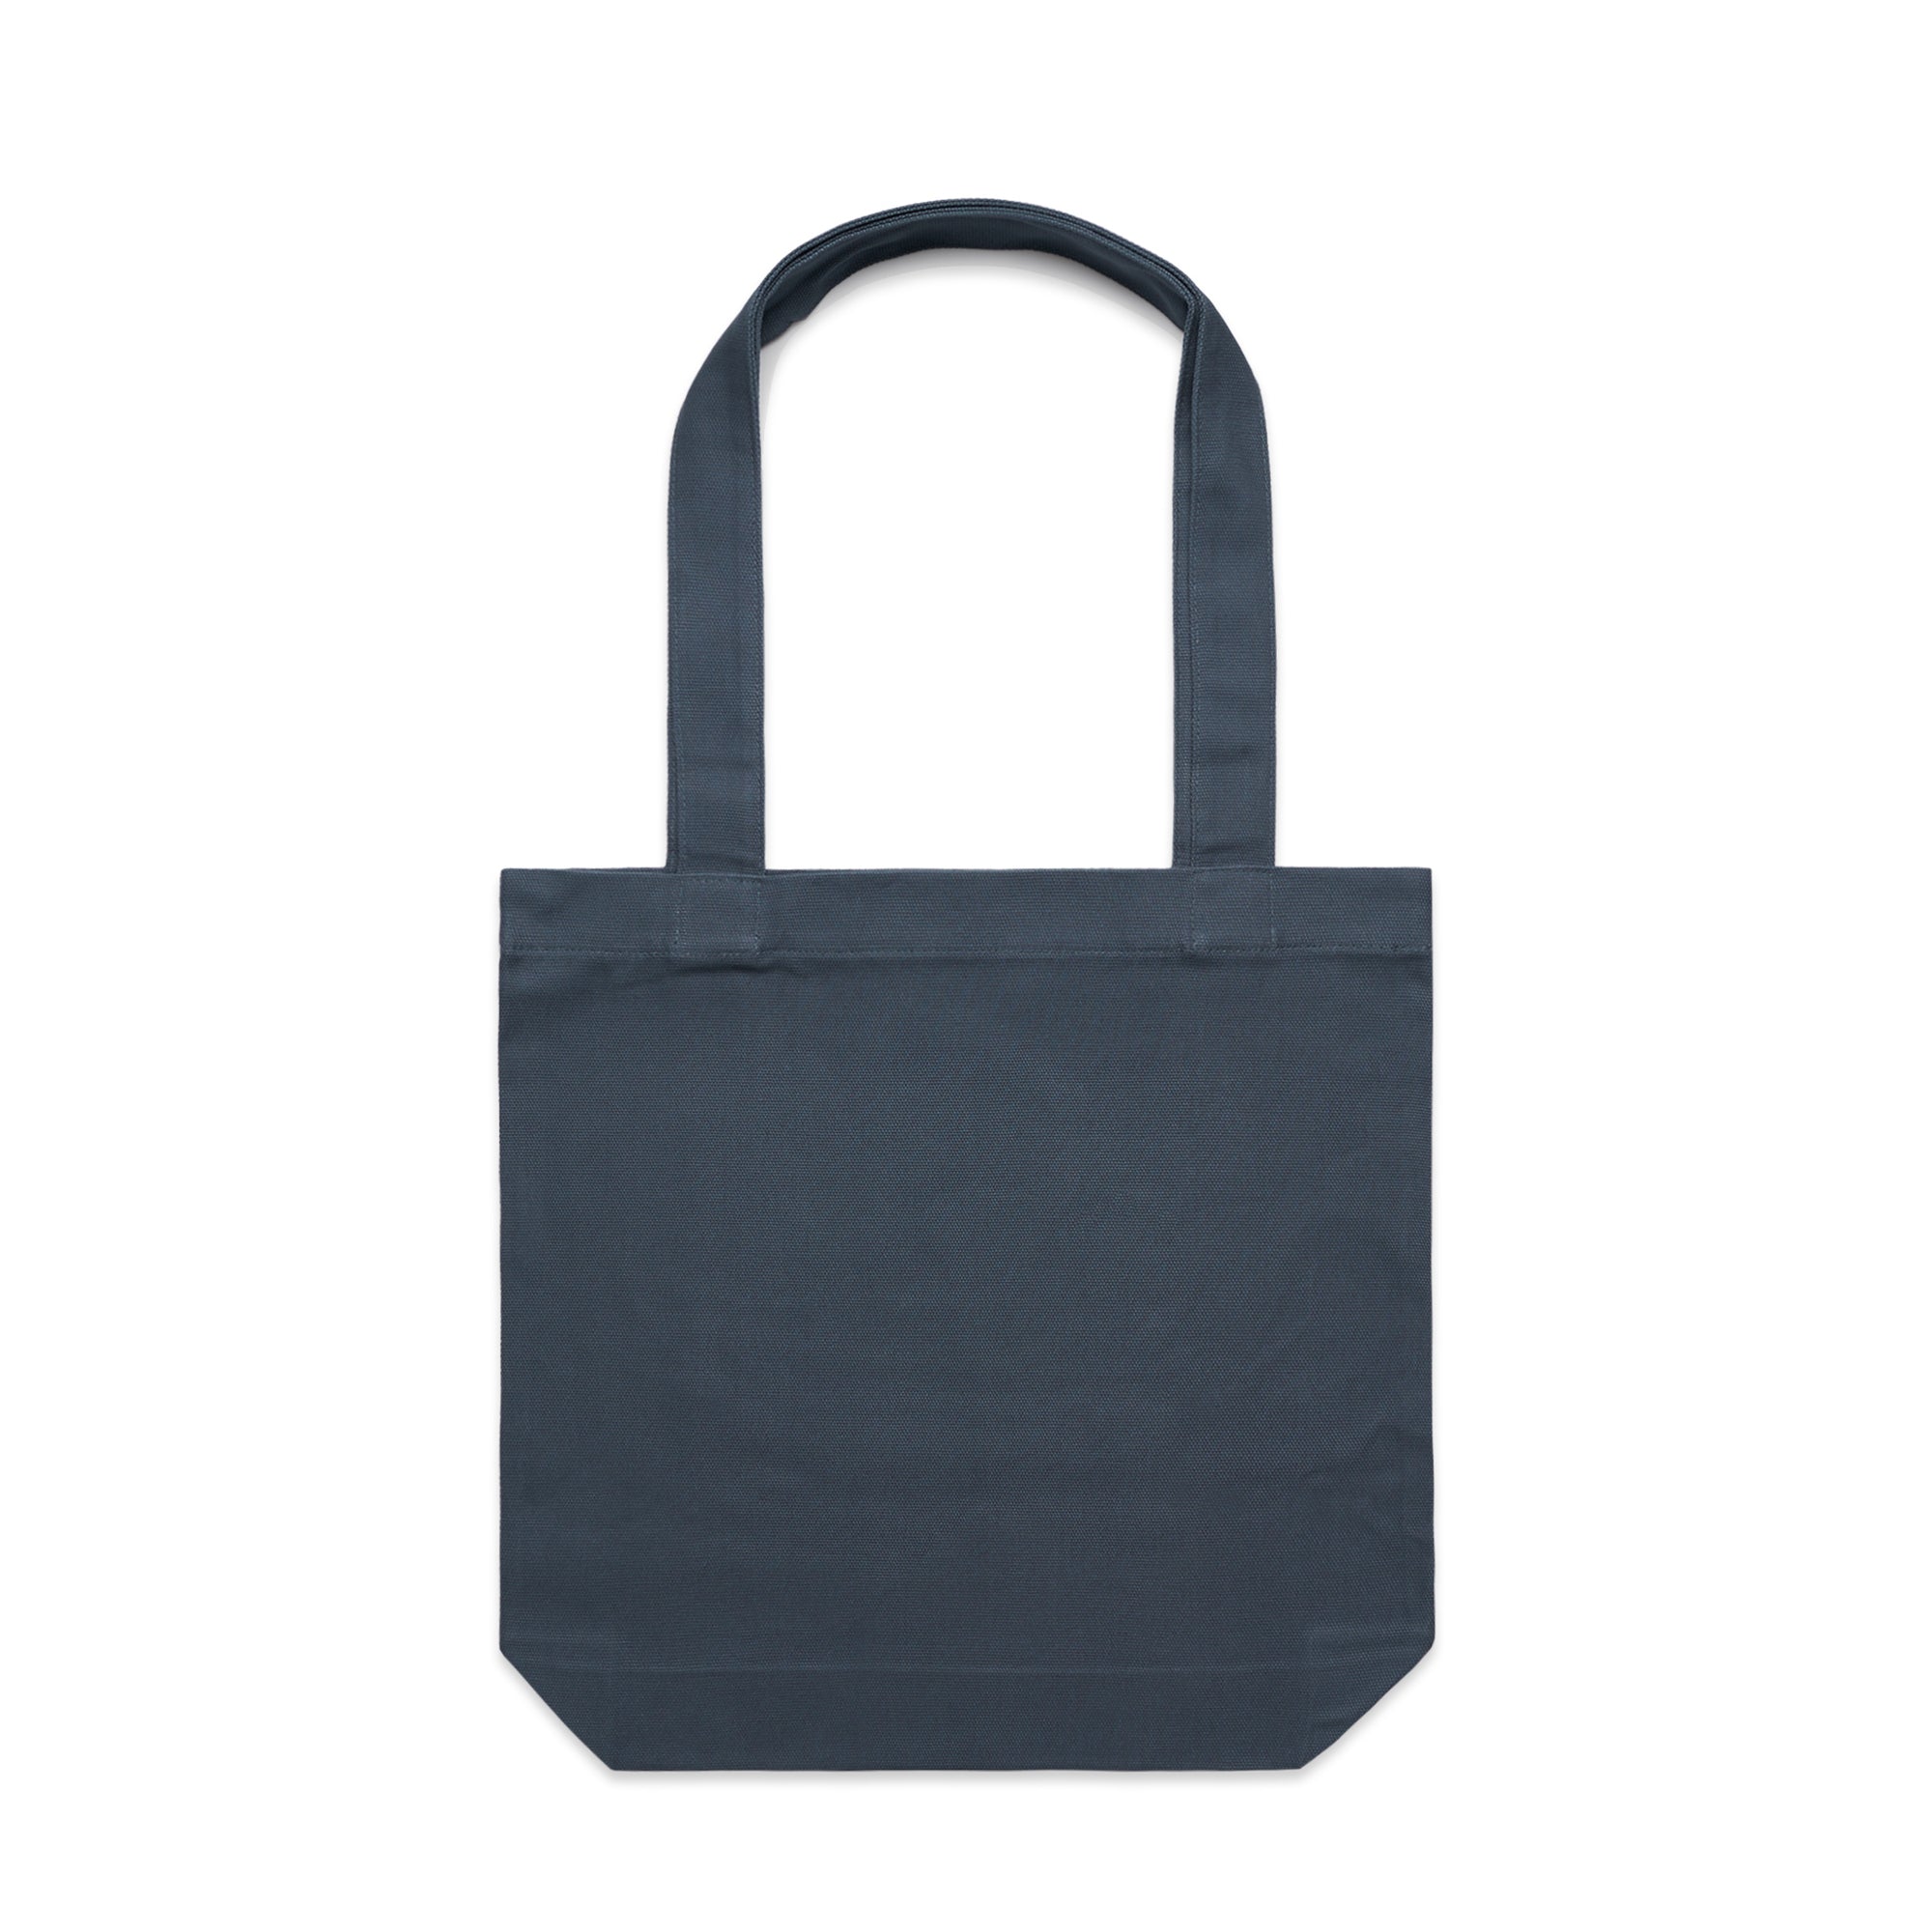 Carrie Tote Bag - Uniforms and Workwear NZ - Ticketwearconz